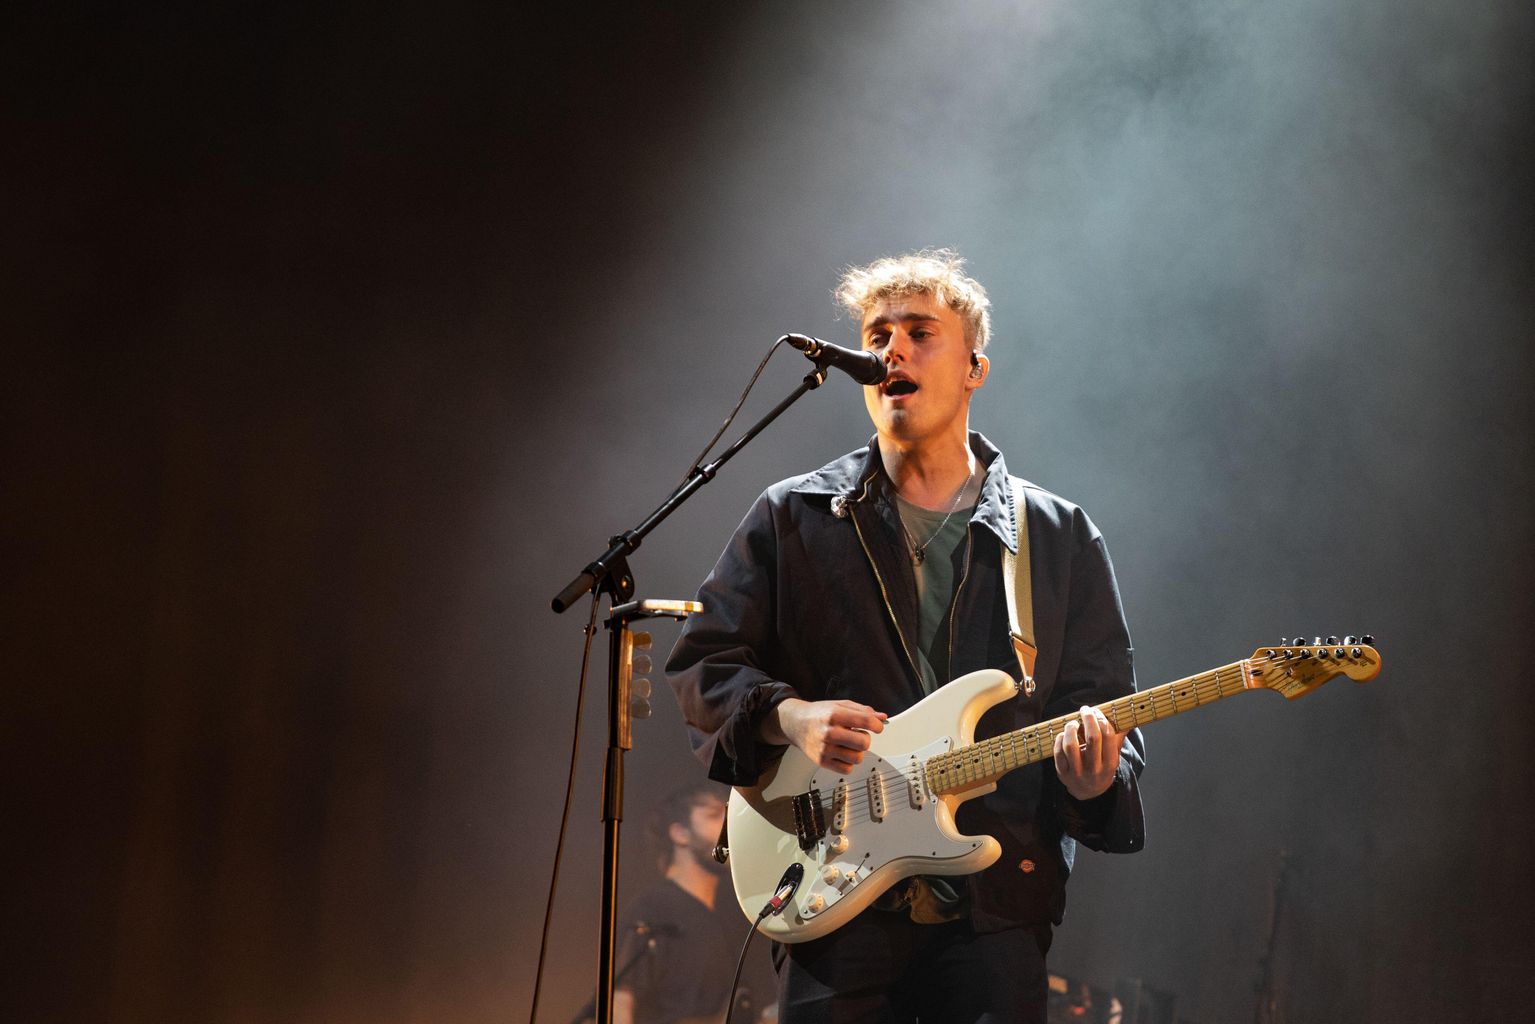 Travel updates for Sam Fender and P!nk gigs in the North East